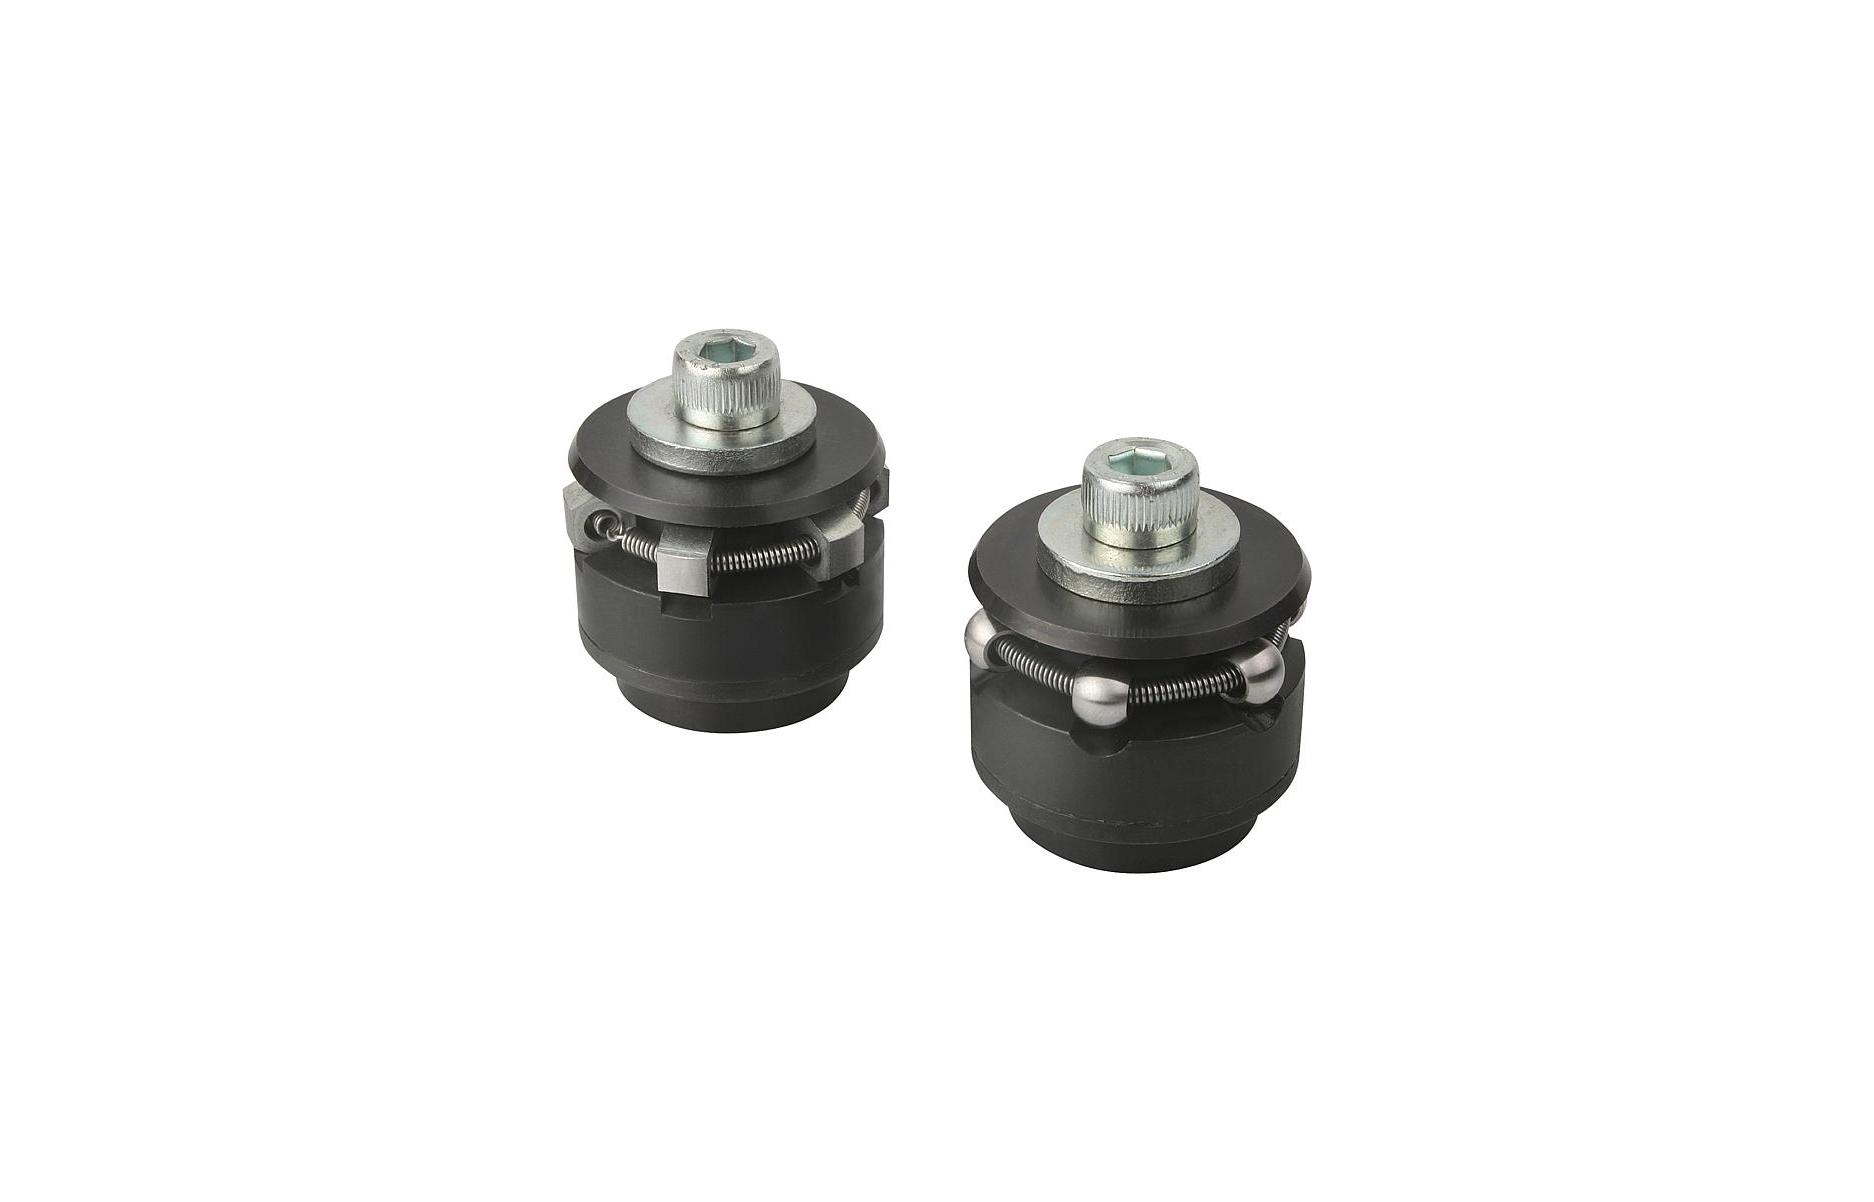 K0358 Centring clamps with ball or hexagon segments